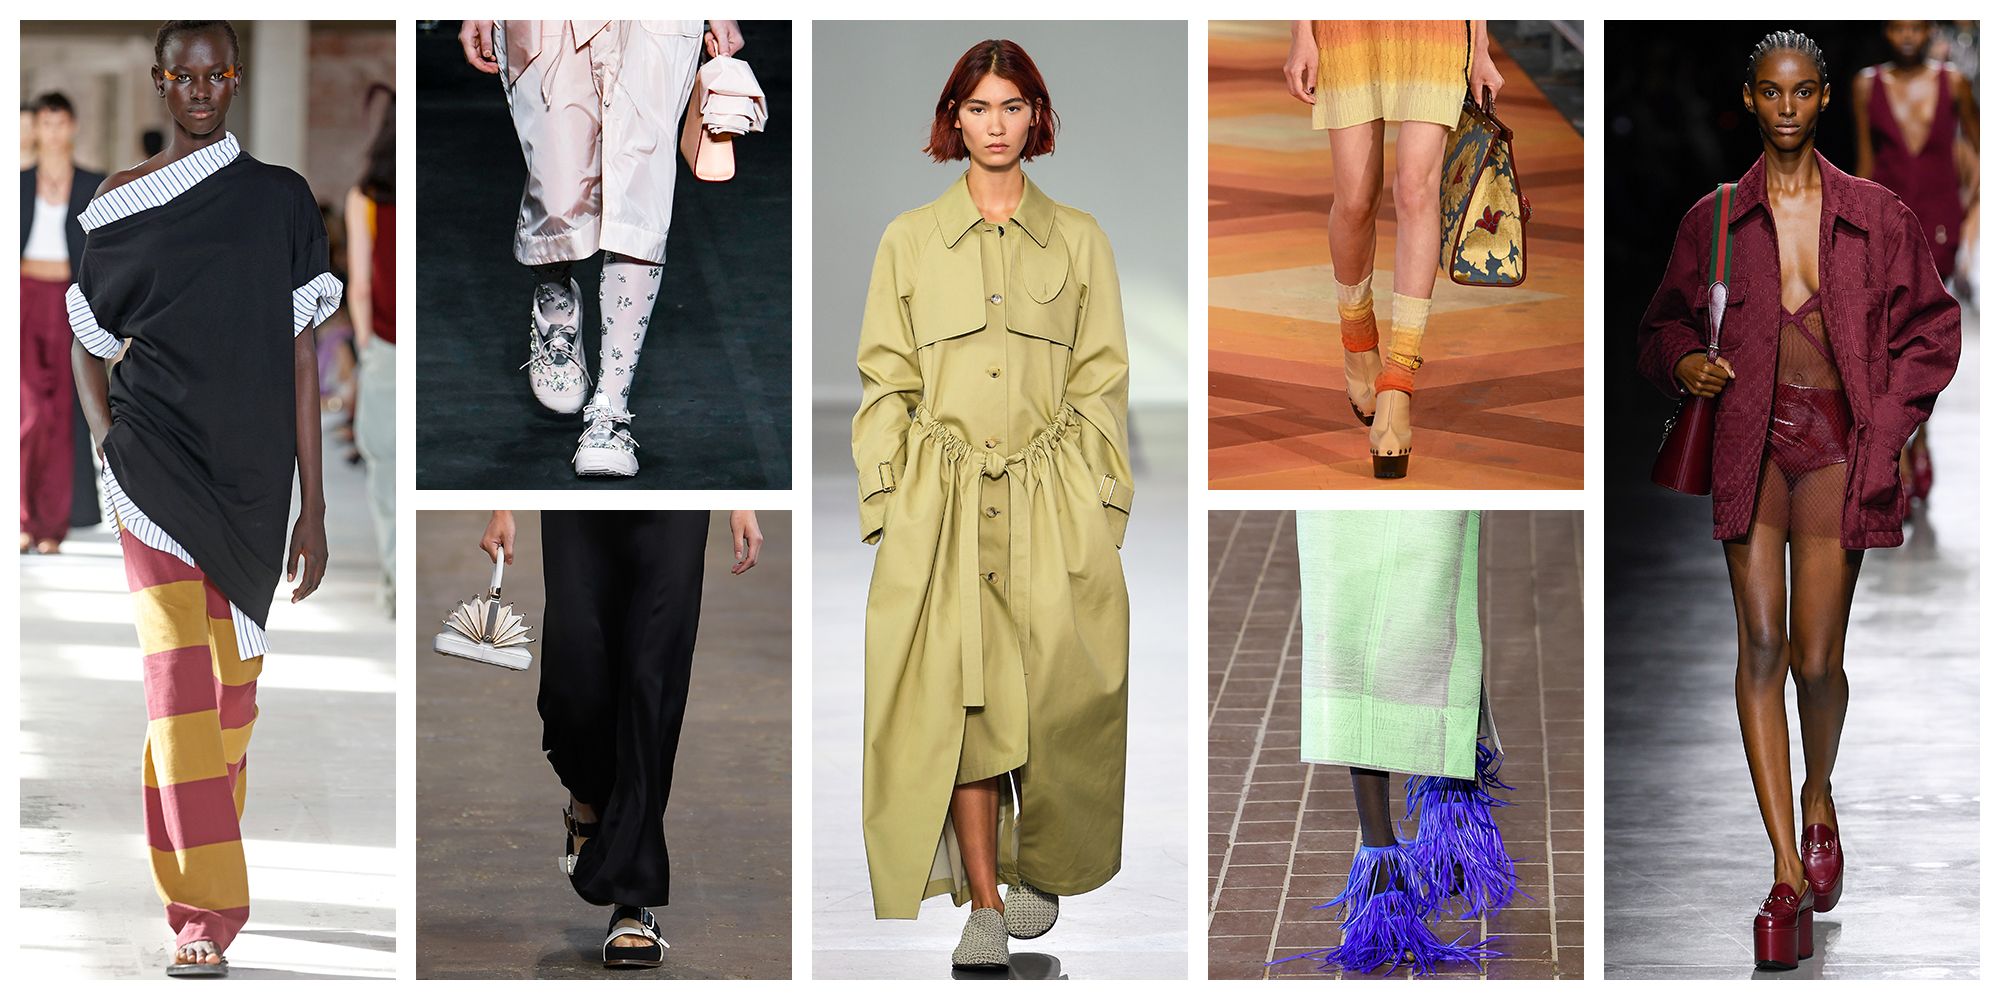 Fashion forecast: Top footwear trends for men and women in spring 2023